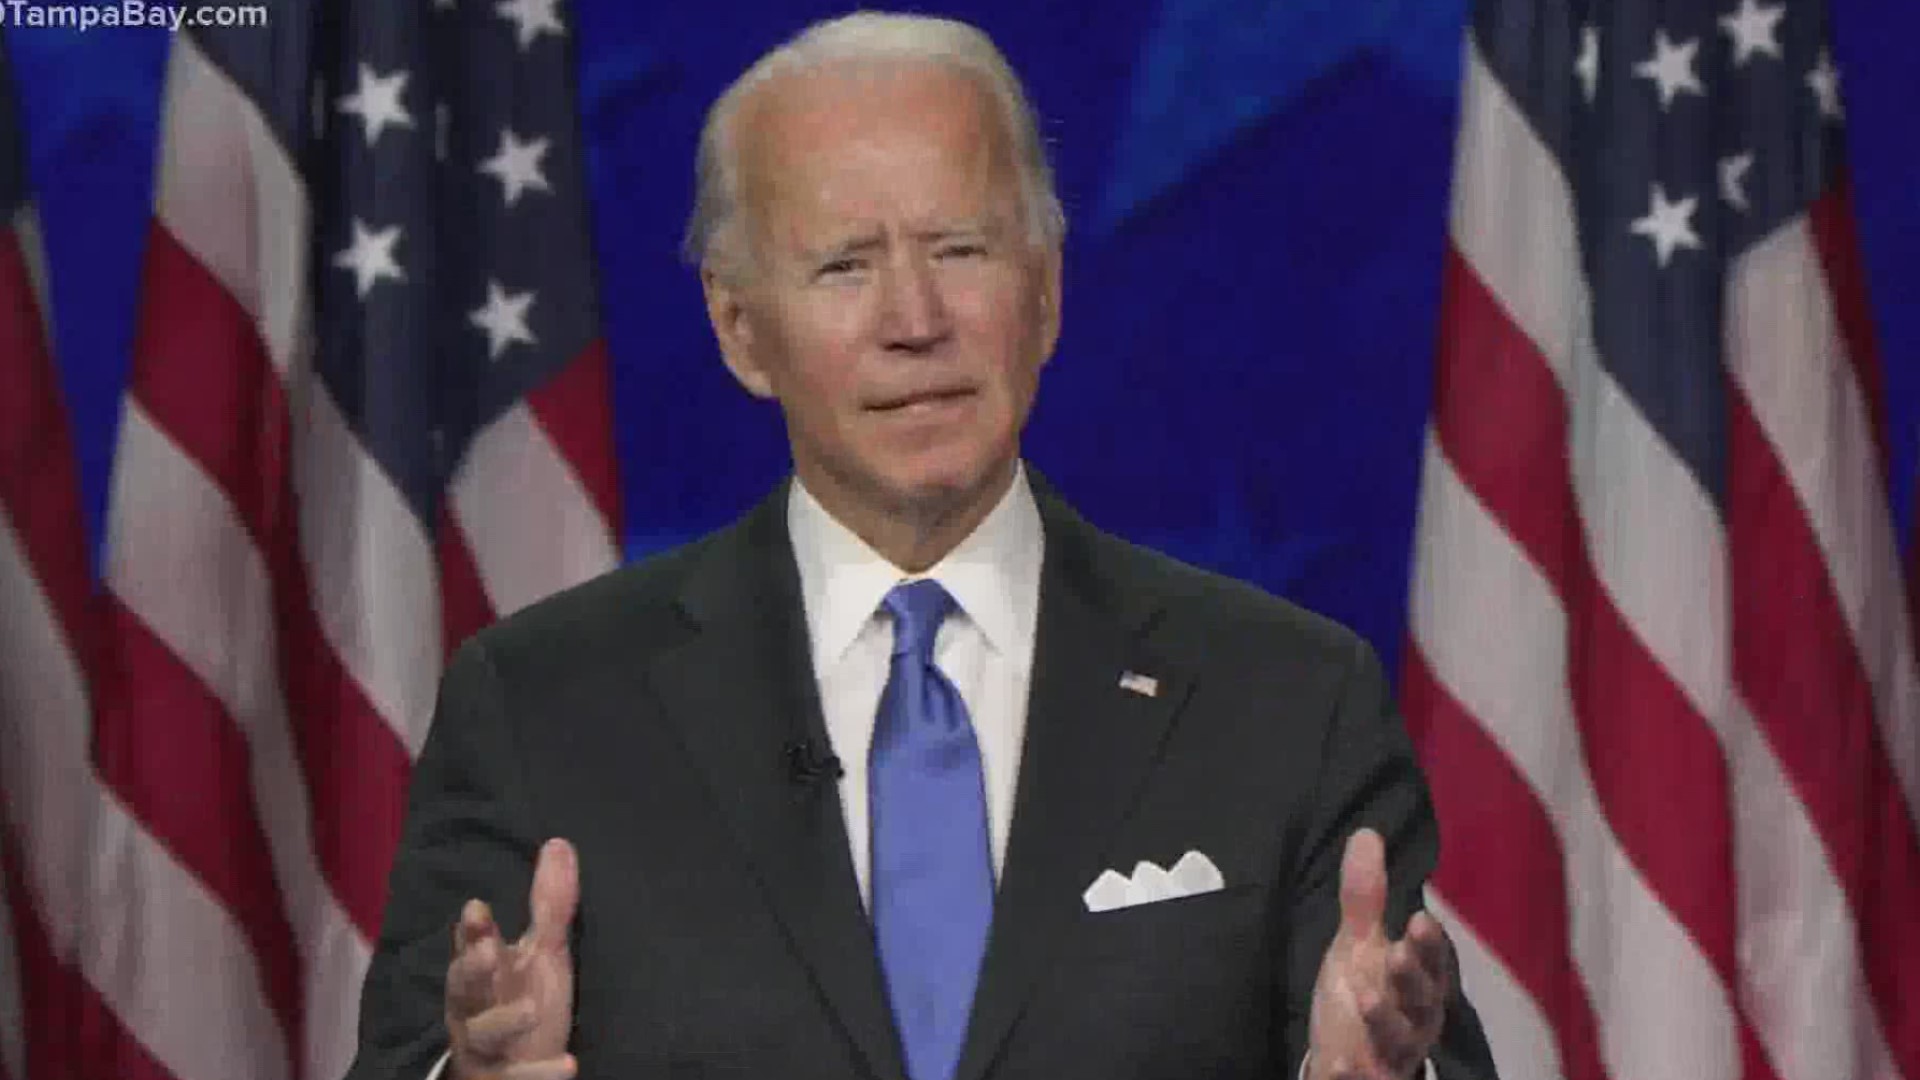 Joe Biden's positive focus Thursday night marked a break from the dire warnings offered by former President Obama and others the night before.